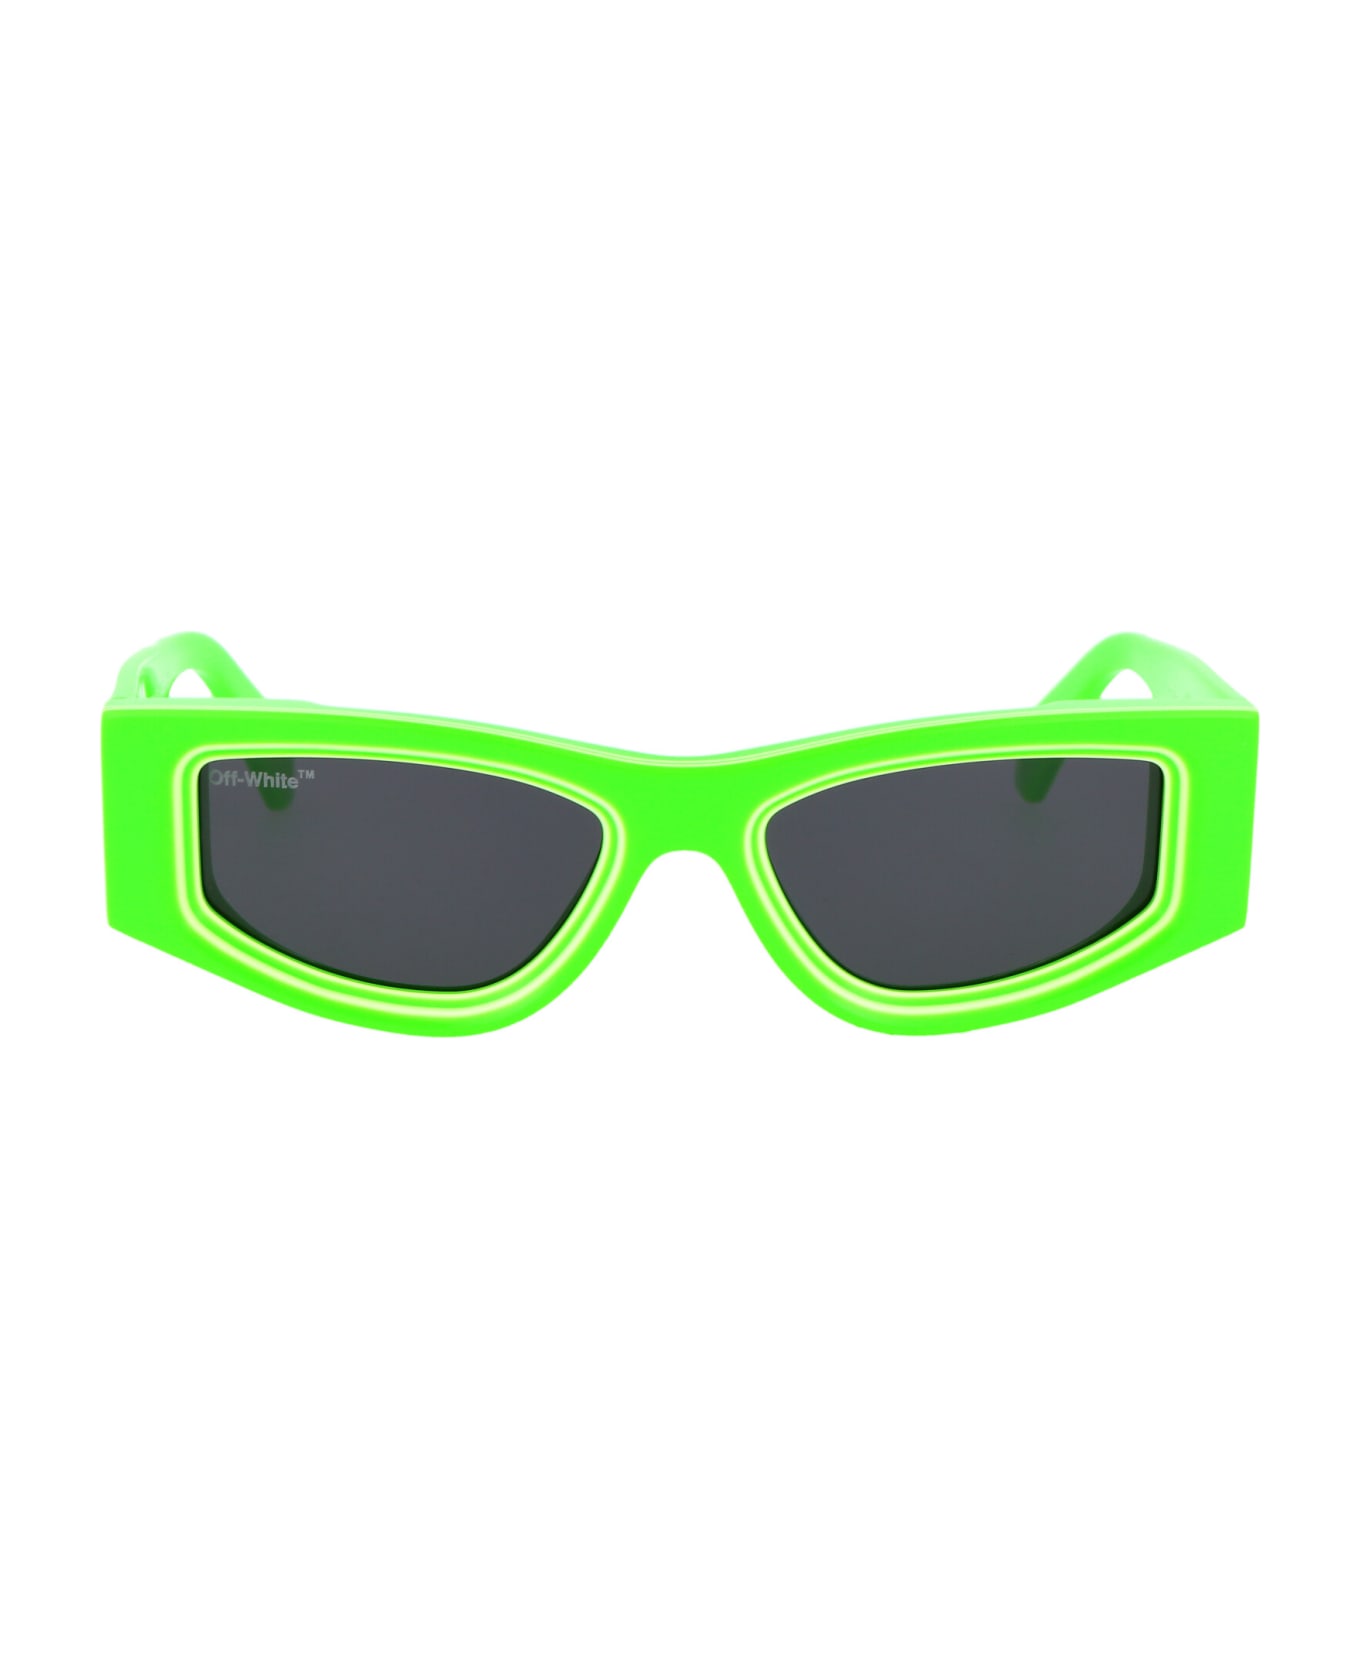 Off-White Andy Sunglasses - 5907 GREEN